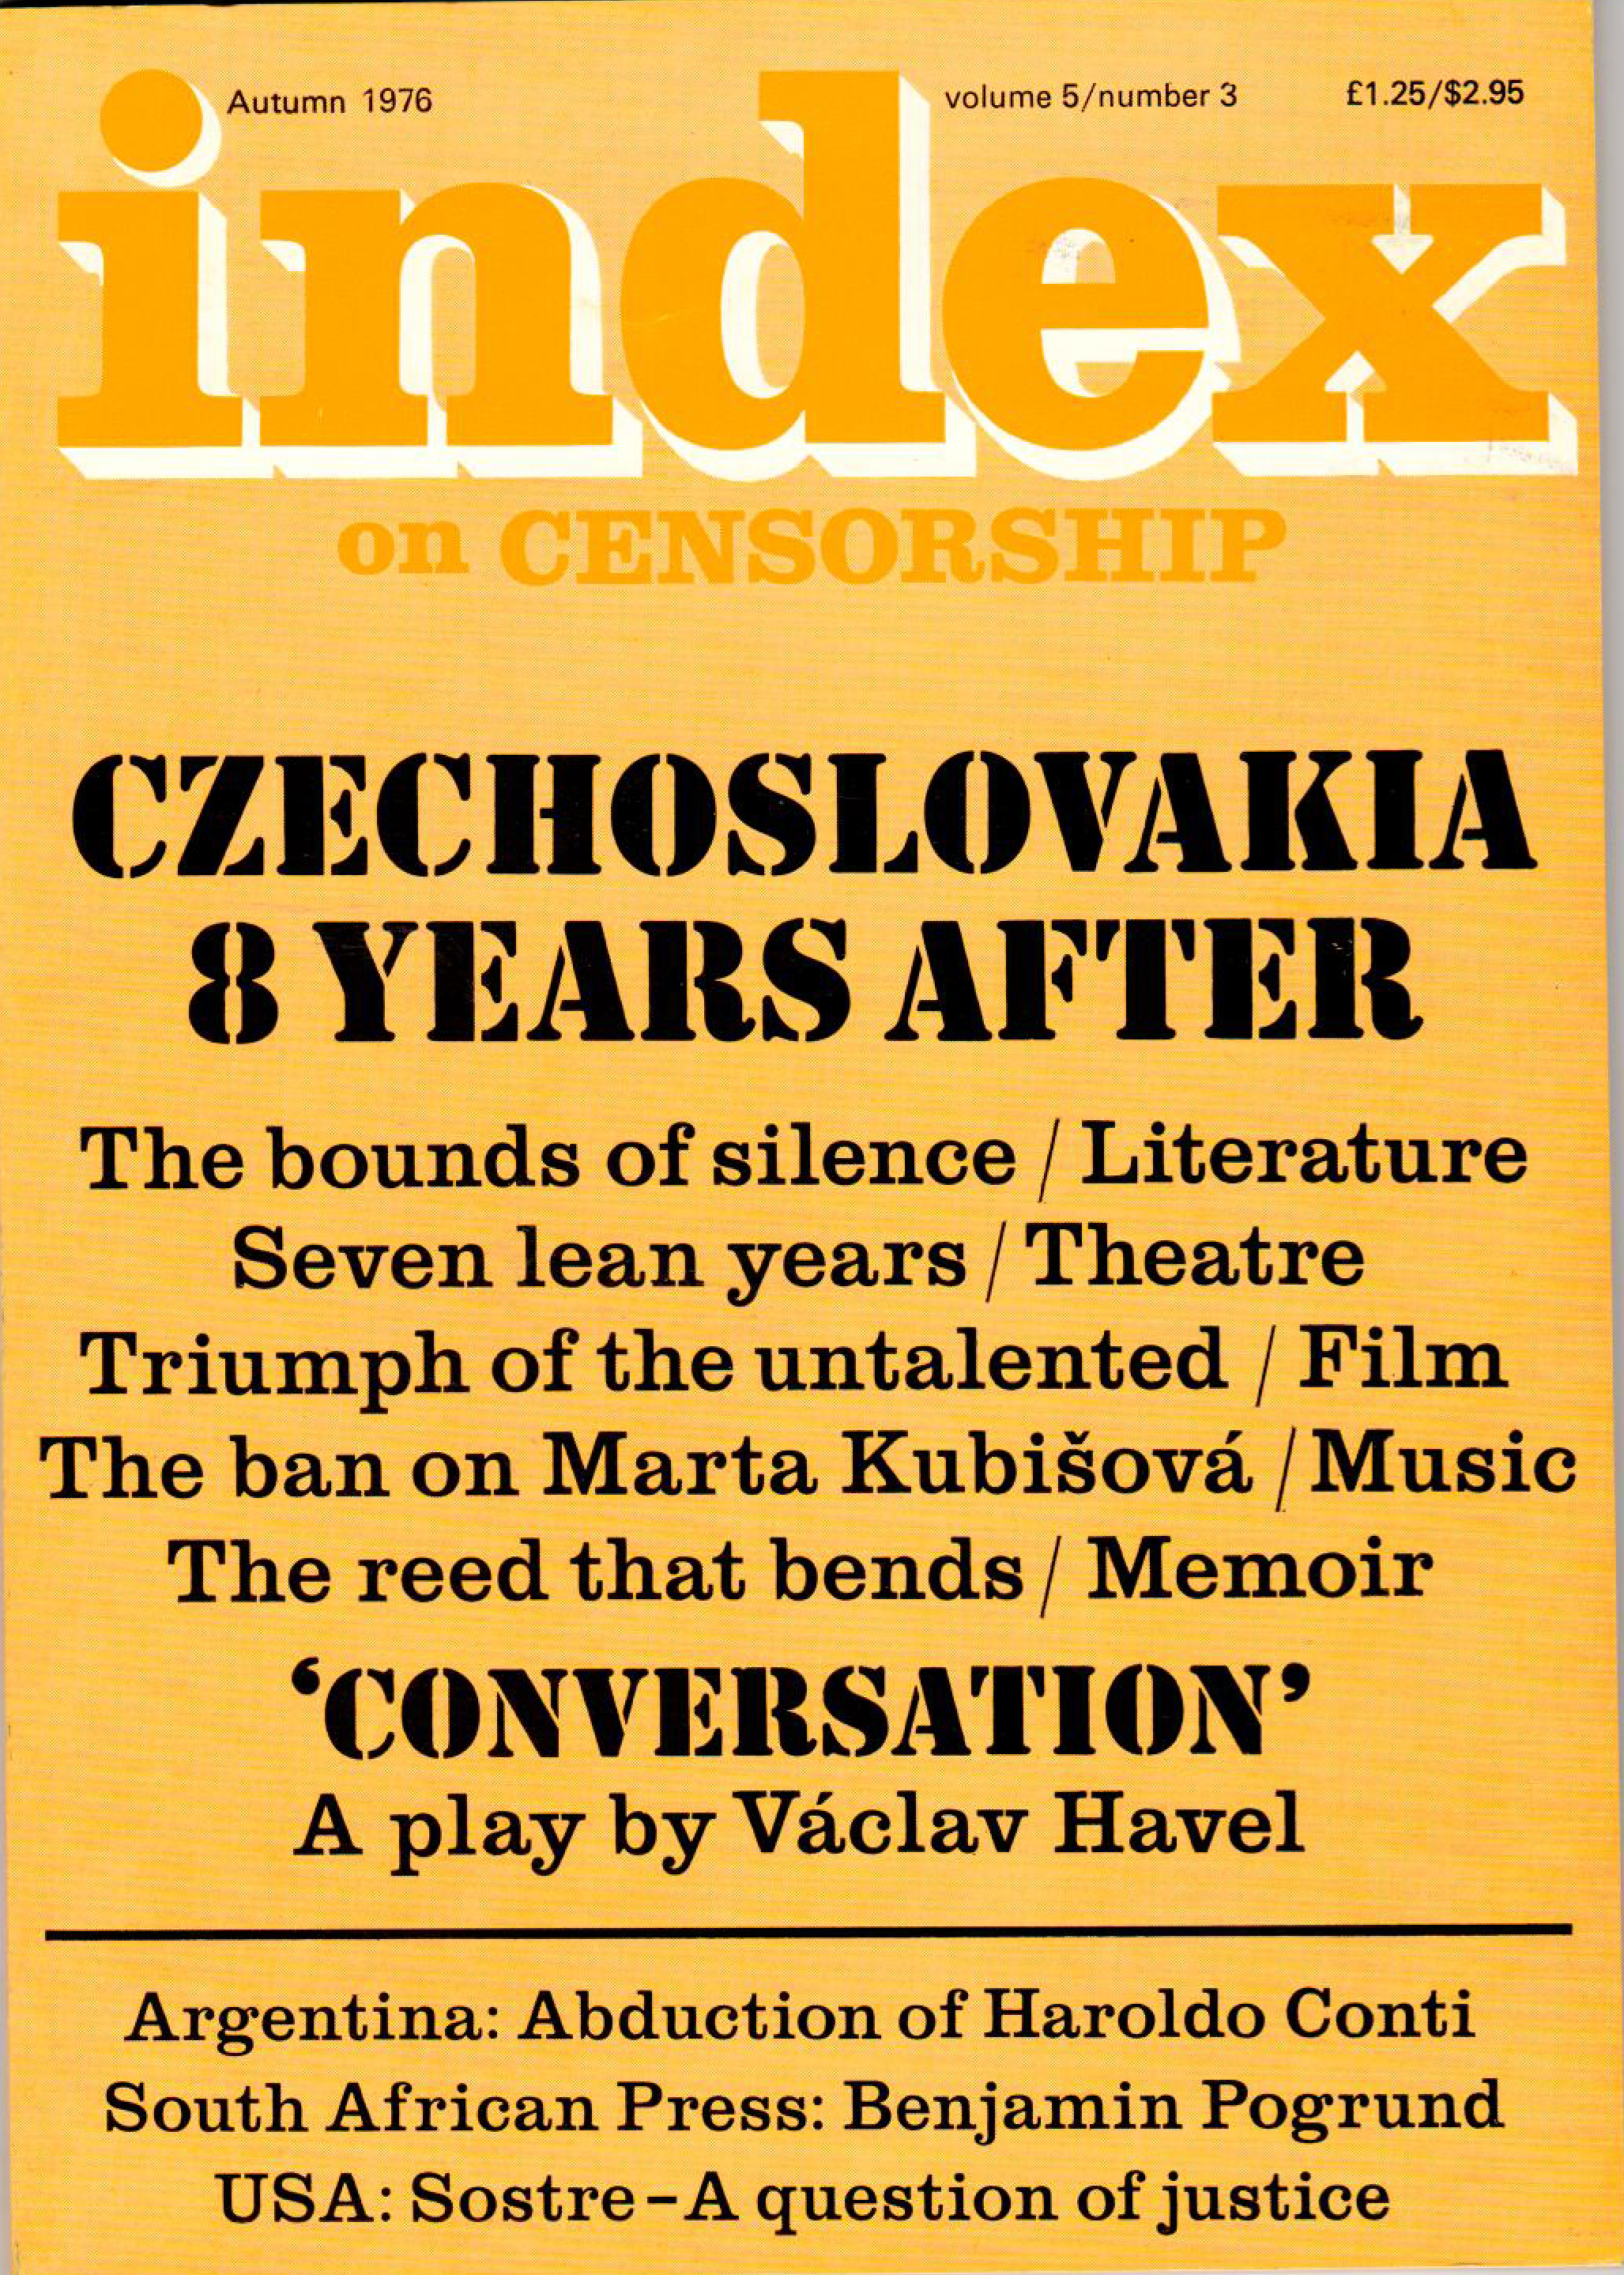 Czechoslovakia 8 years after, the Autumn 1976 issue of Index on Censorship magazine